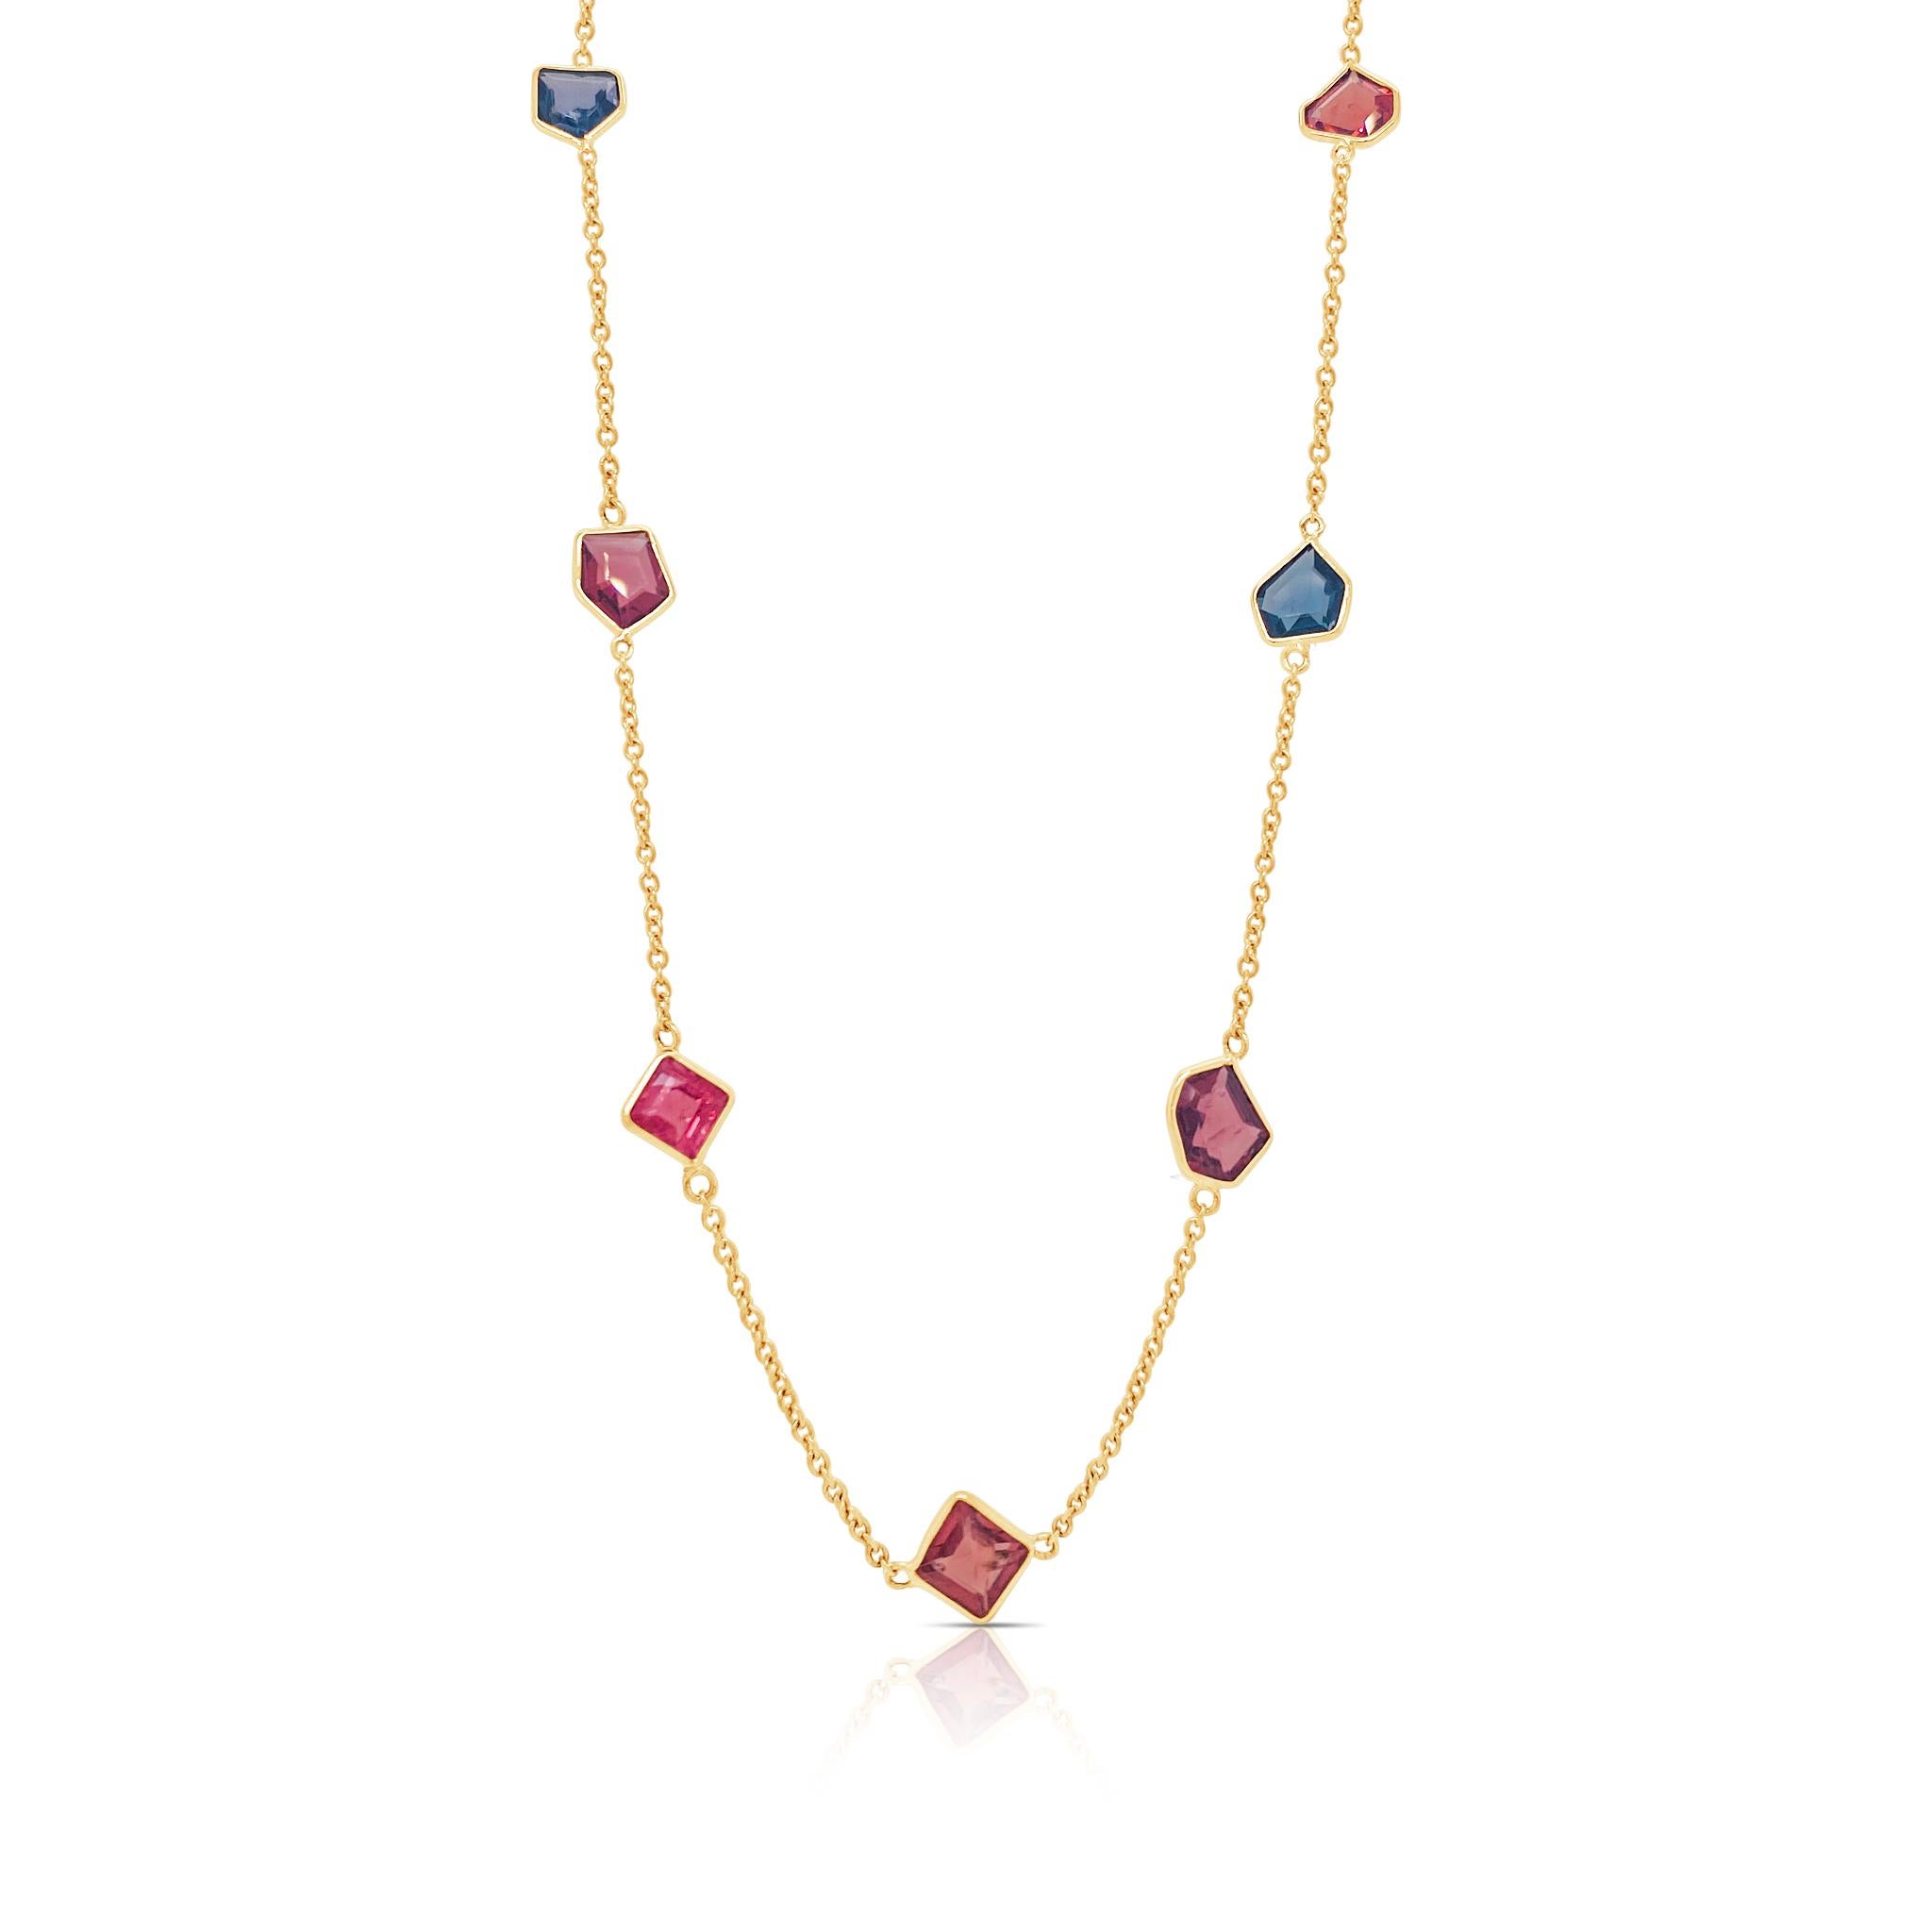 Tresor Beautiful Necklace features 12.89 carats of Tourmaline. The necklace is an ode to the luxurious yet classic beauty with sparkly gemstones and feminine hues. Its contemporary and modern design make it perfect and versatile to be worn at any